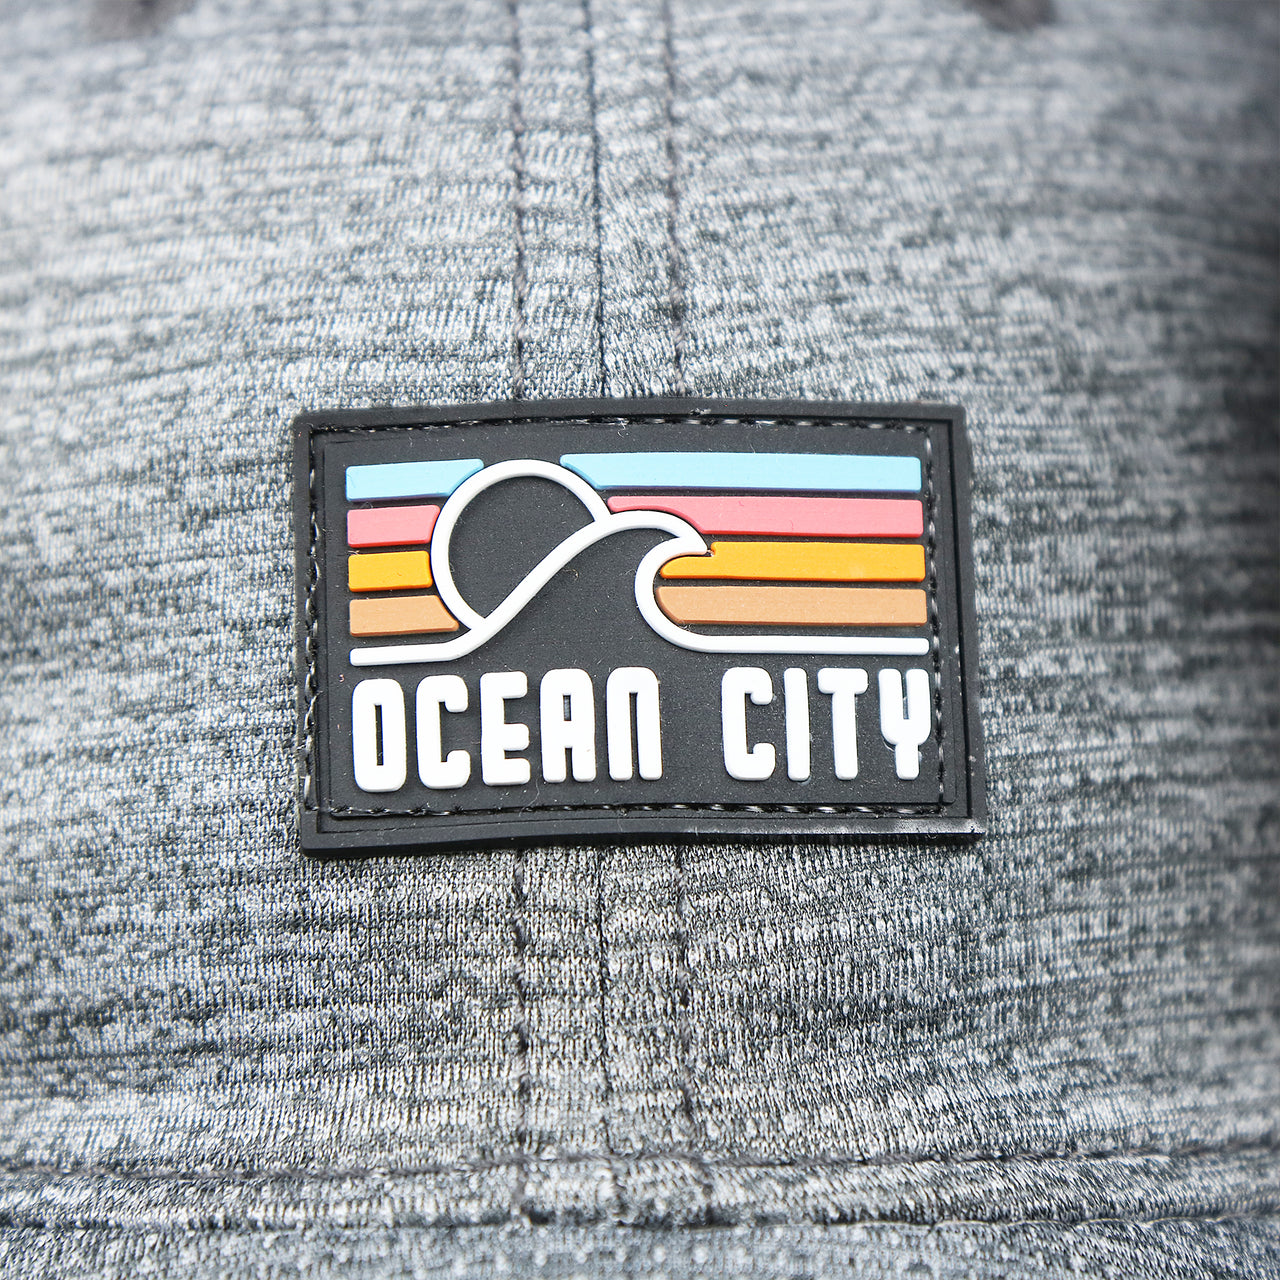 The Ocean City Sunset Rubber Patch on the New Jersey High Point PVC Ocean City Rubber Patch Cool Fit Adjustable Dad Hat | Performance Gray Dad Hat